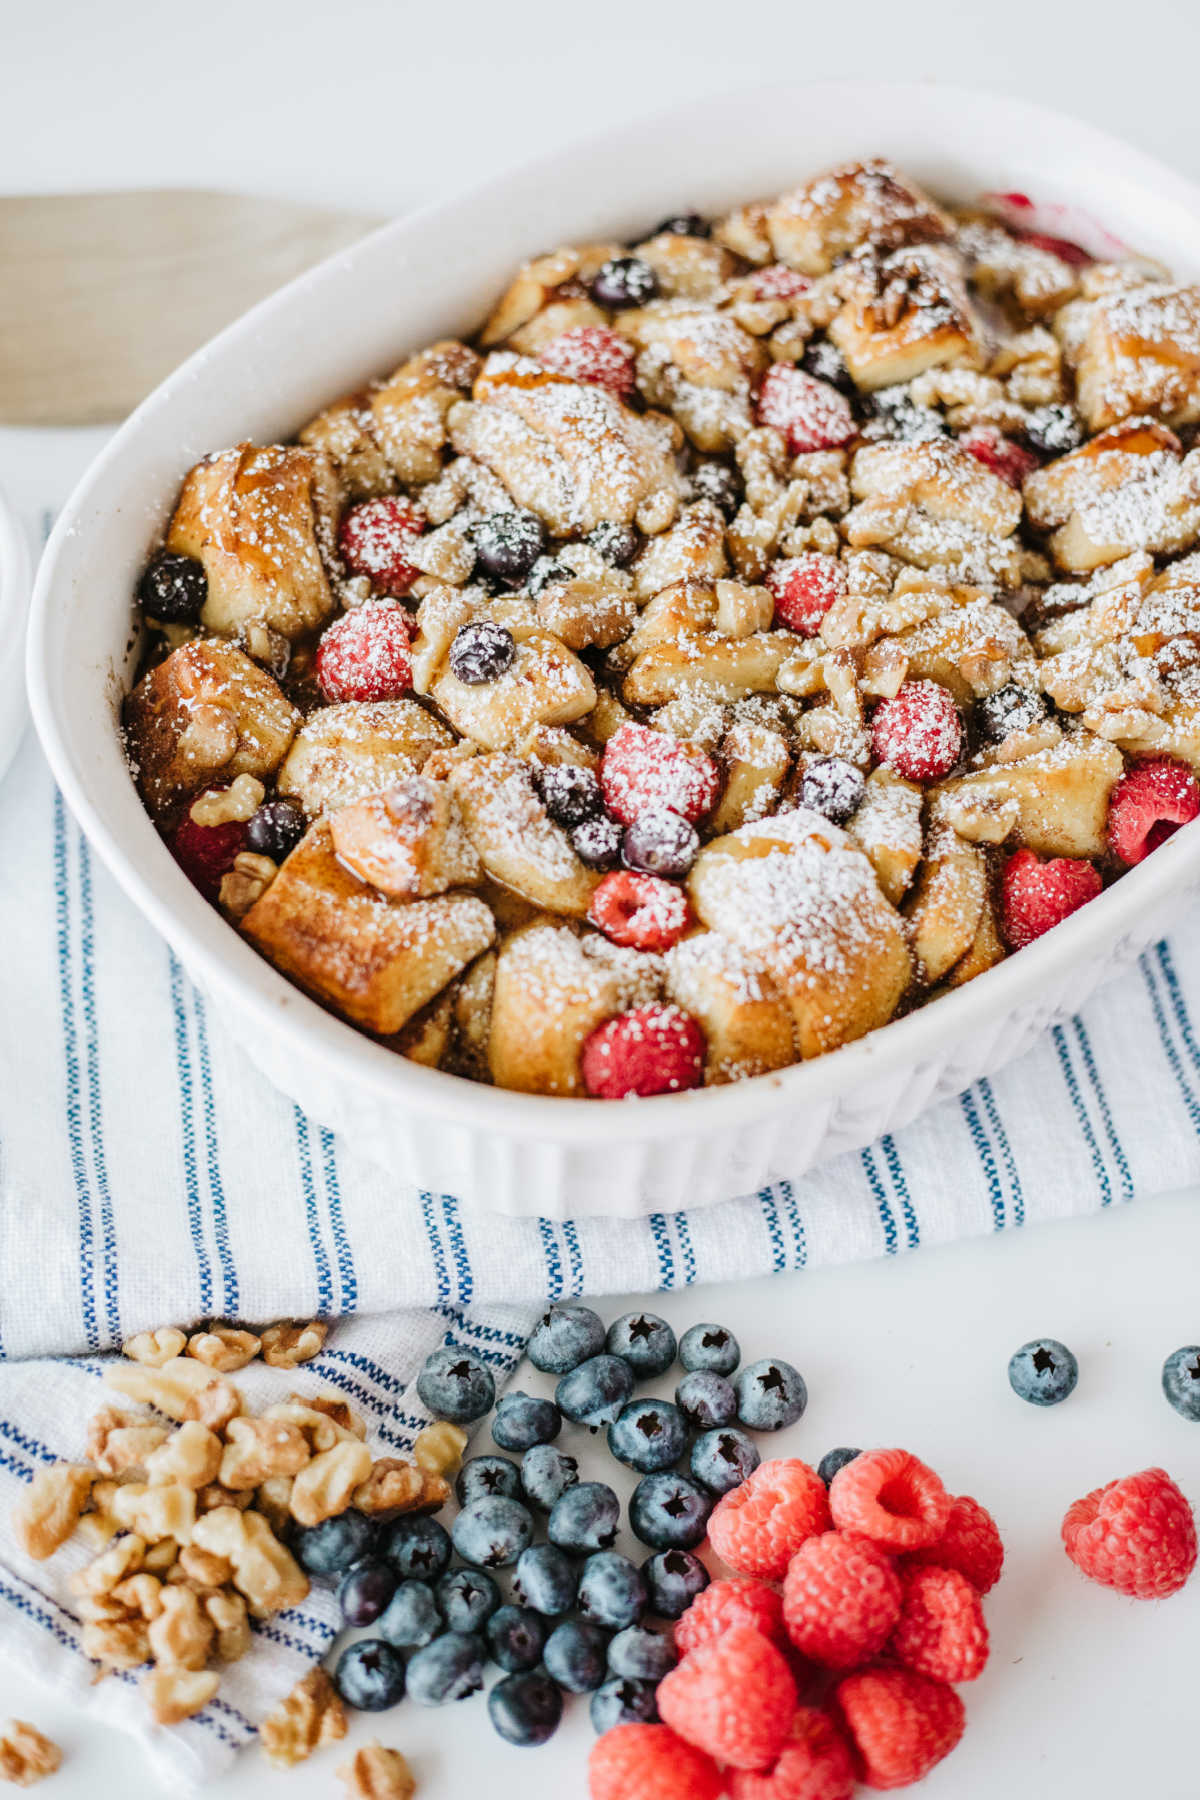 Cinnamon roll french toast casserole with berries and powdered sugar, ready to eat.